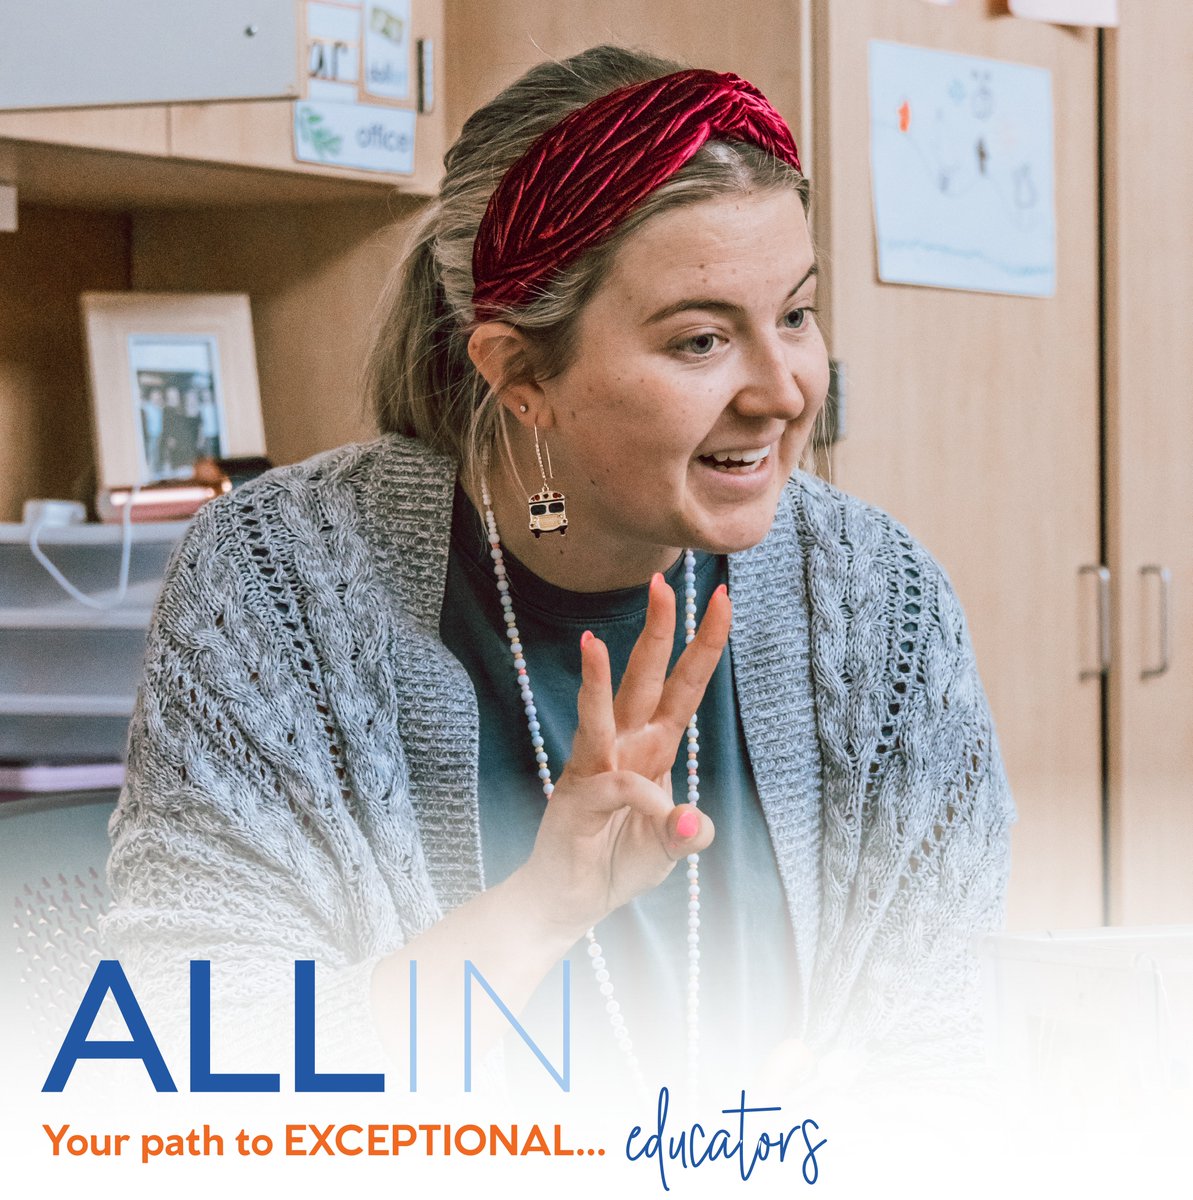 This is 💯 where you belong. Enroll today at IowaCitySchools.org/Enroll! We’re #ALLin on creating exceptional opportunities for our students. Learn how our EDUCATORS set us apart from the rest at IowaCitySchools.org. #WhereYouBelong #BeExceptional